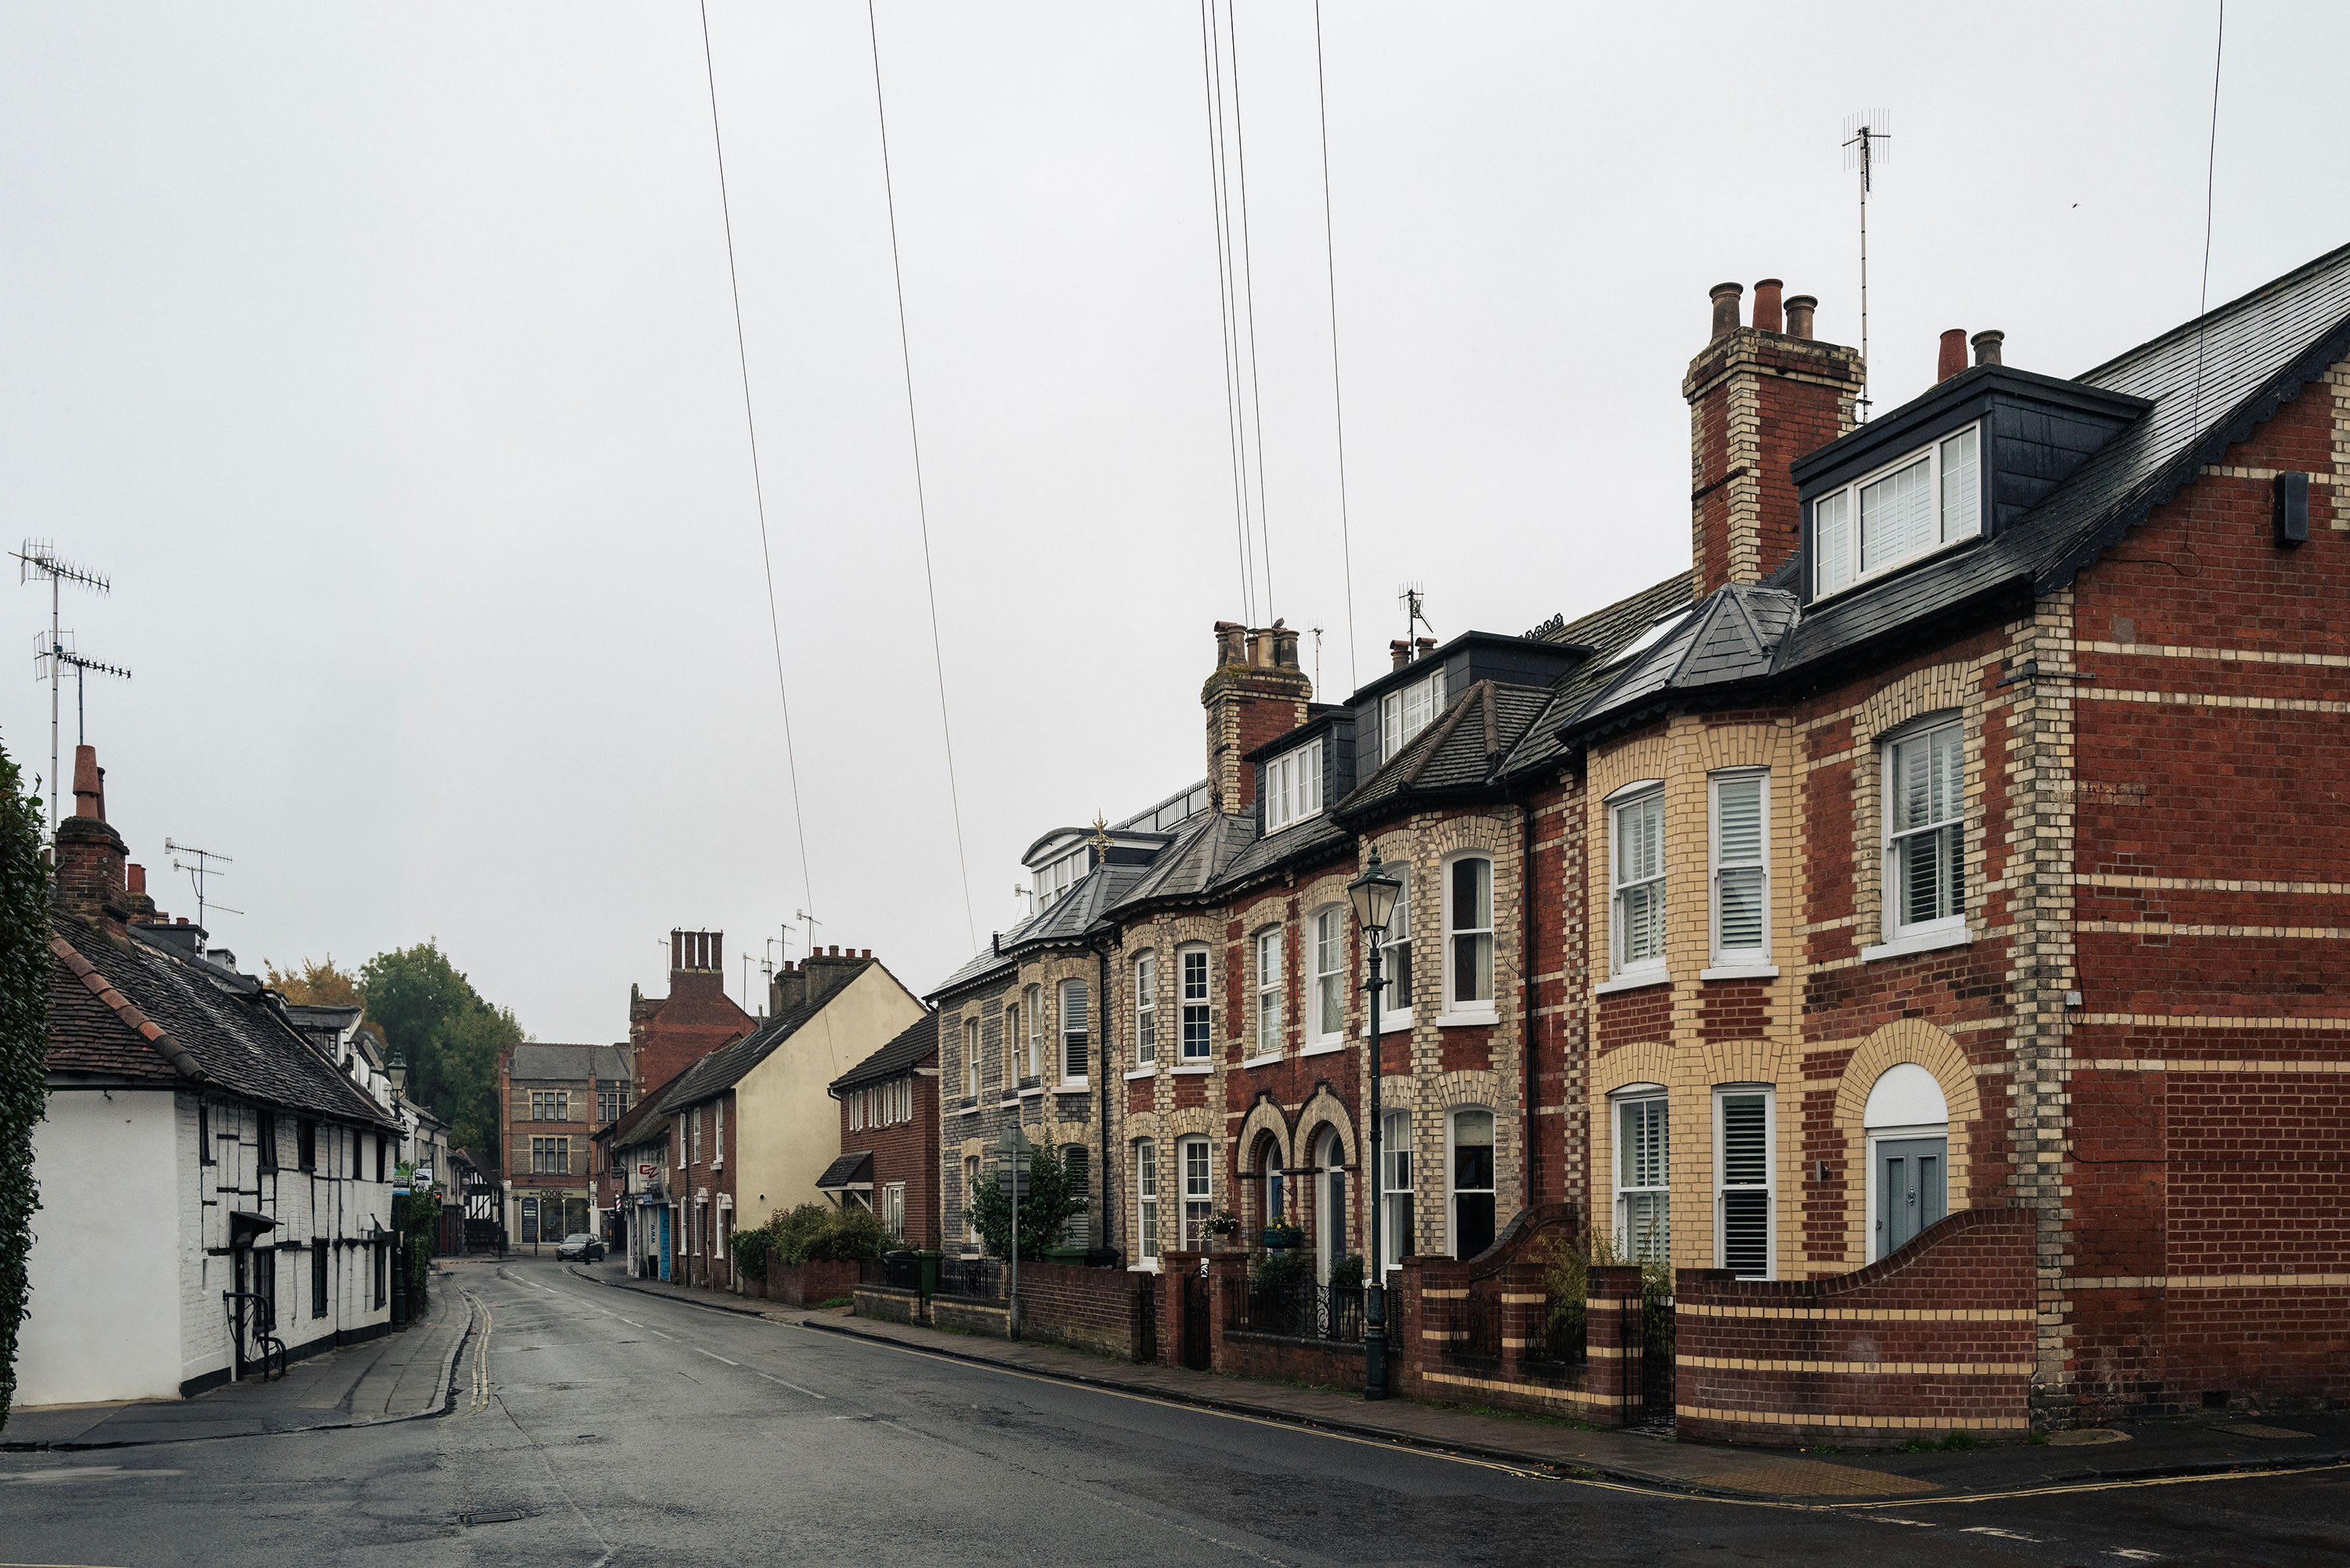 Misty street with traditional brick houses, wet road, no people or vehicles, overcast sky, serene and historical atmosphere.